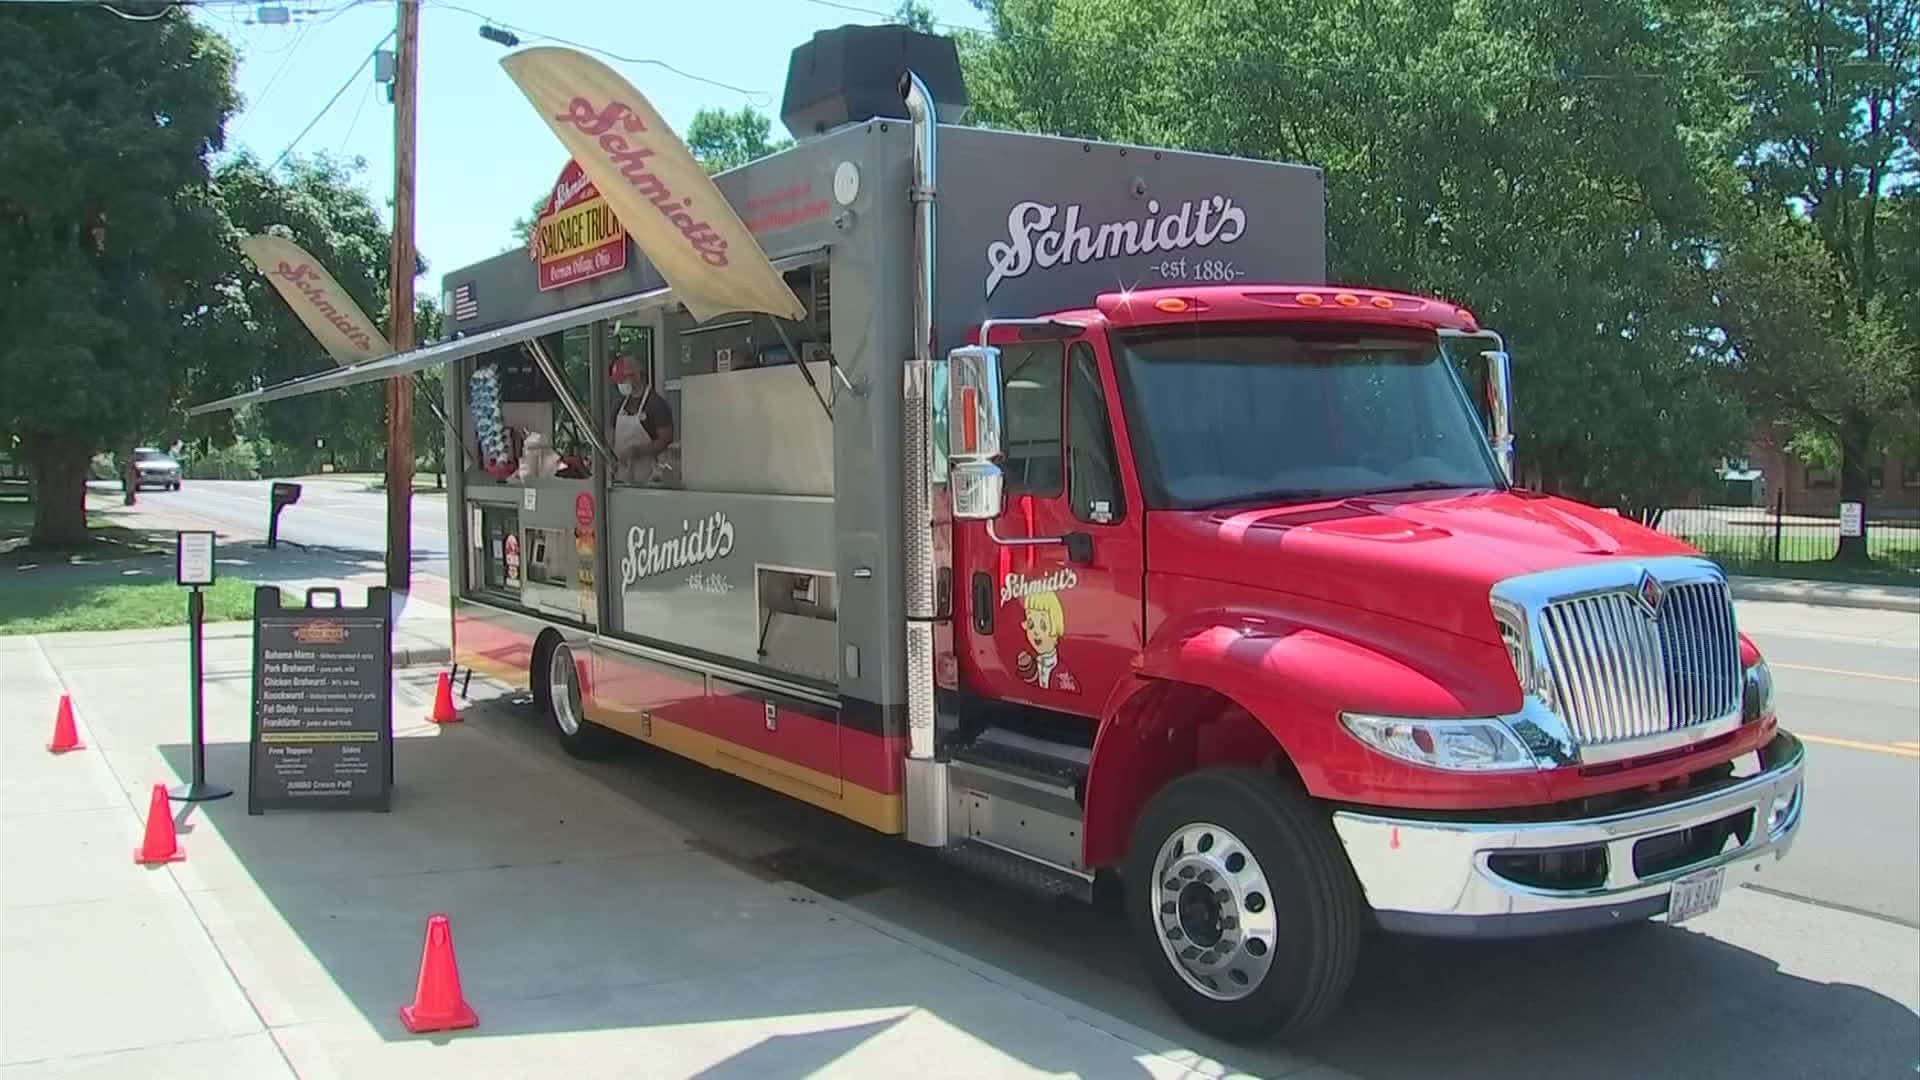 The restaurant business has been hit hard during the pandemic, but how are food trucks doing?